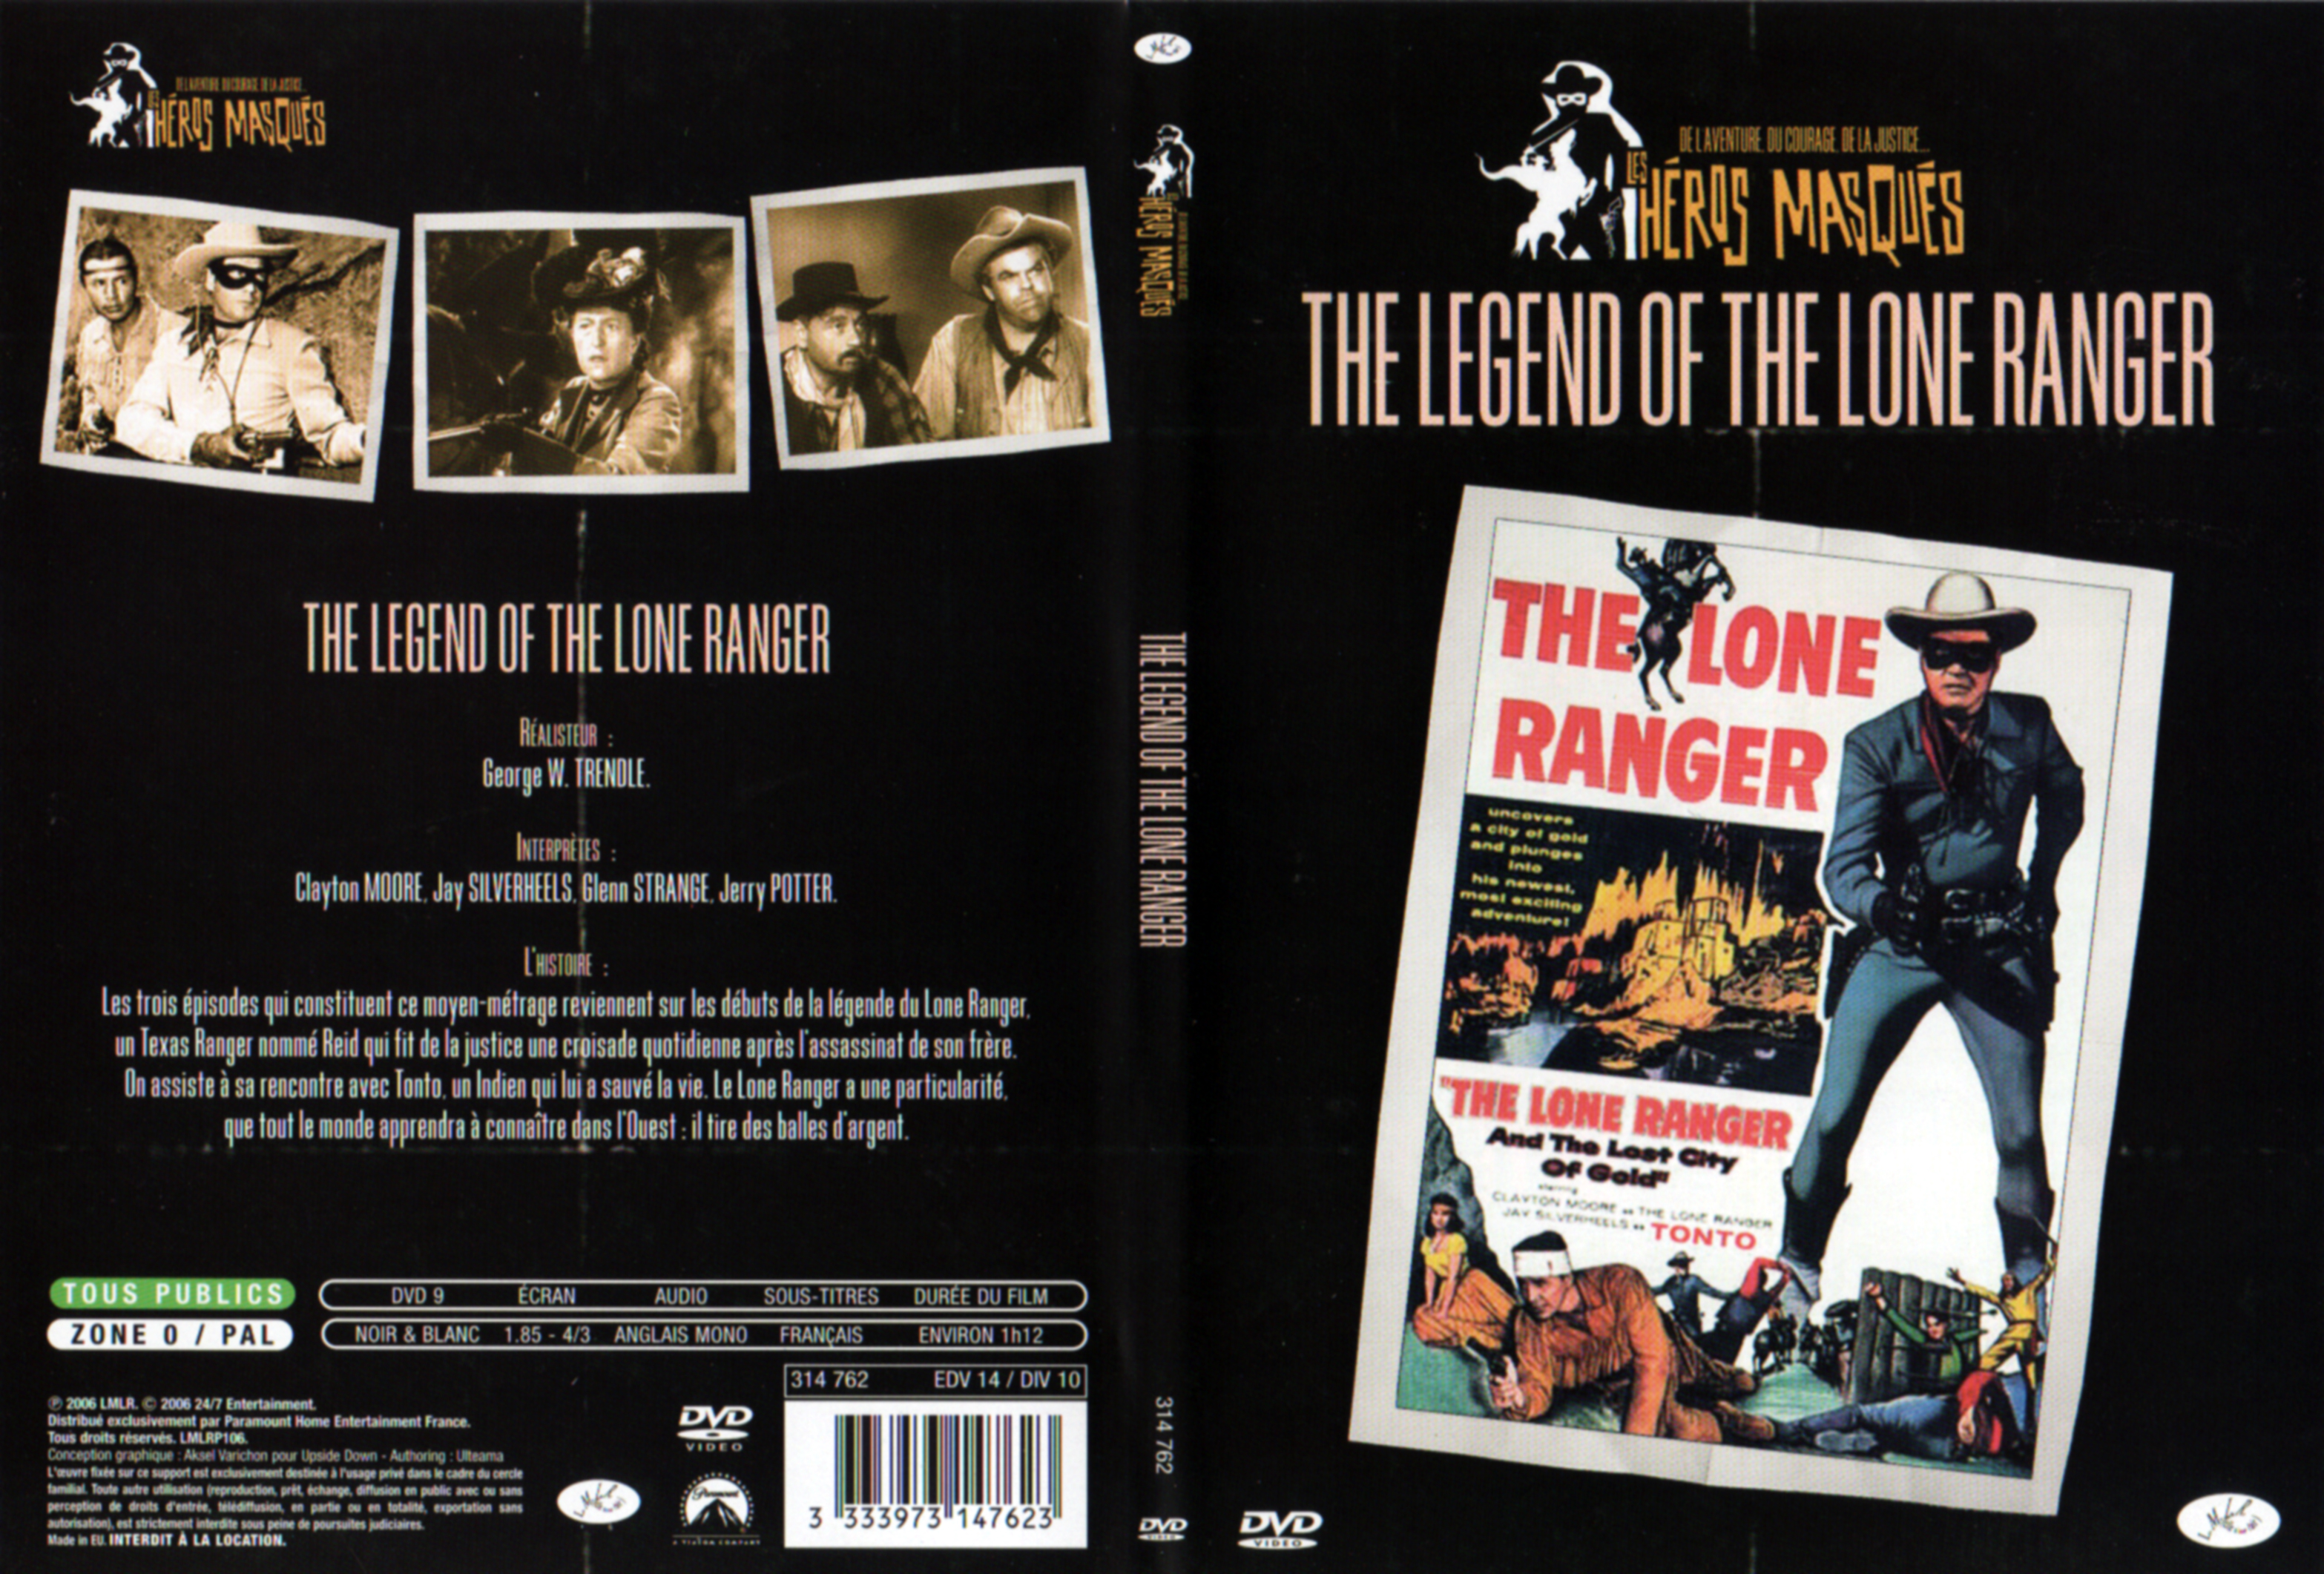 Jaquette DVD The legend of the lone ranger